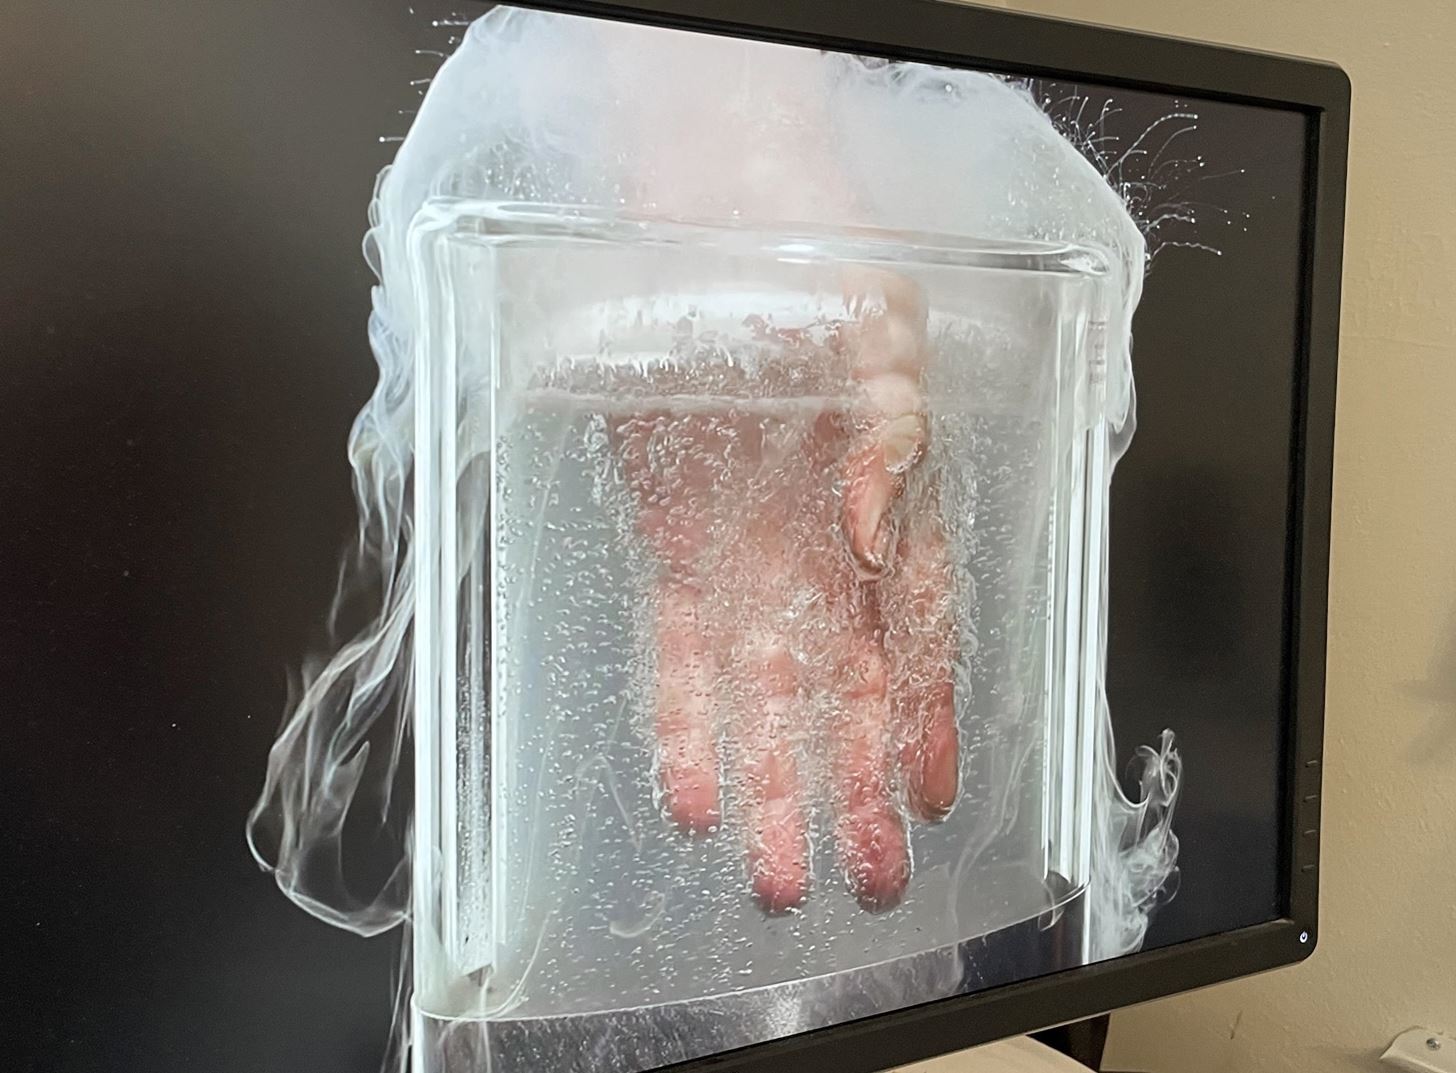 Hand Fully Submerged in Liquid Nitrogen (OUCH... Right?)